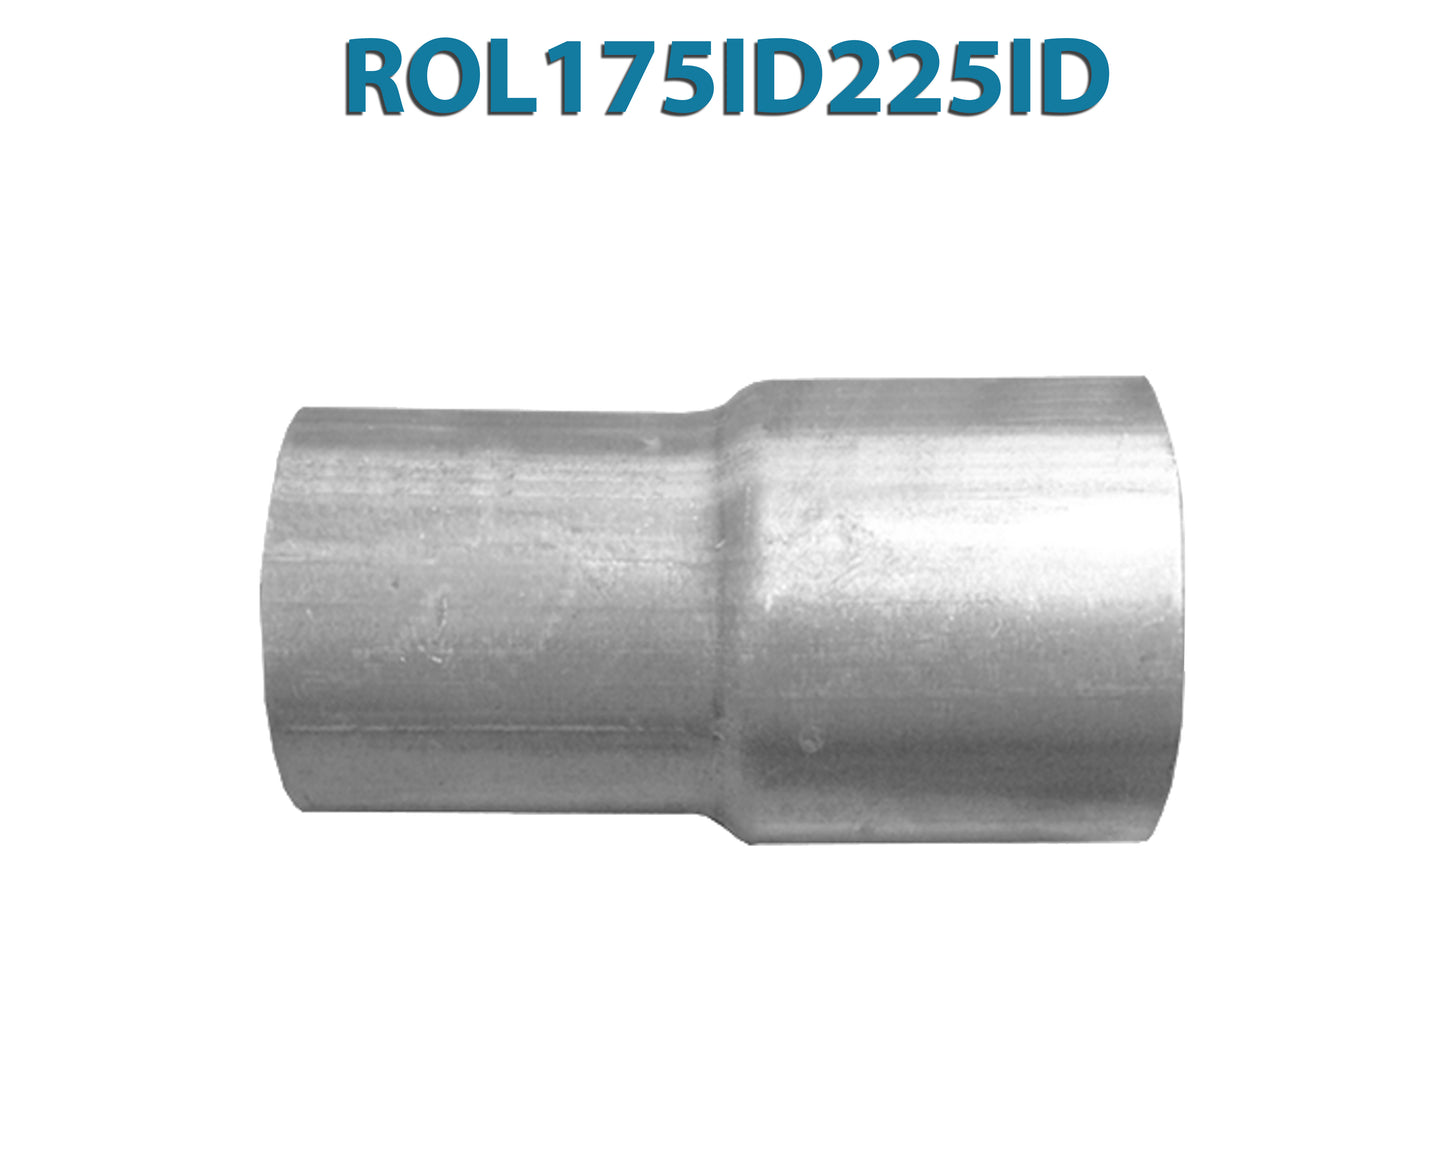 ROL175ID225ID 548543 1 3/4” ID to 2 1/4” ID Universal Exhaust Pipe to Pipe Adapter Reducer